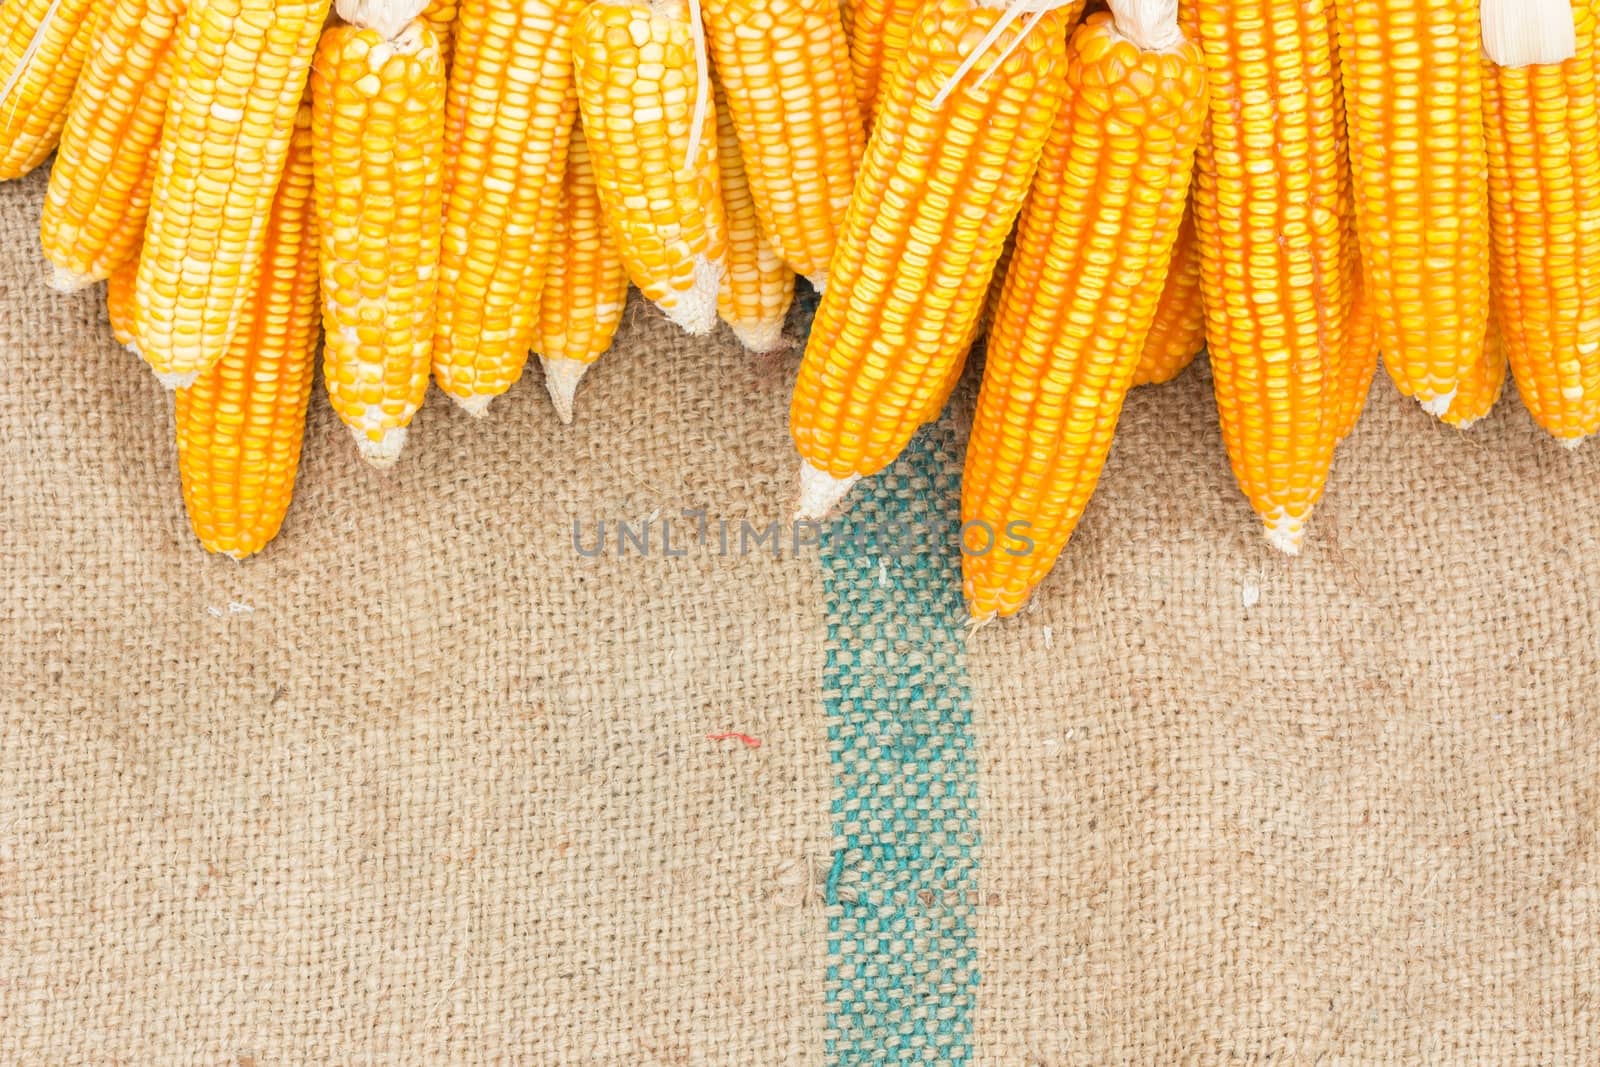 Ears of ripe corn on the gunnysack by a3701027